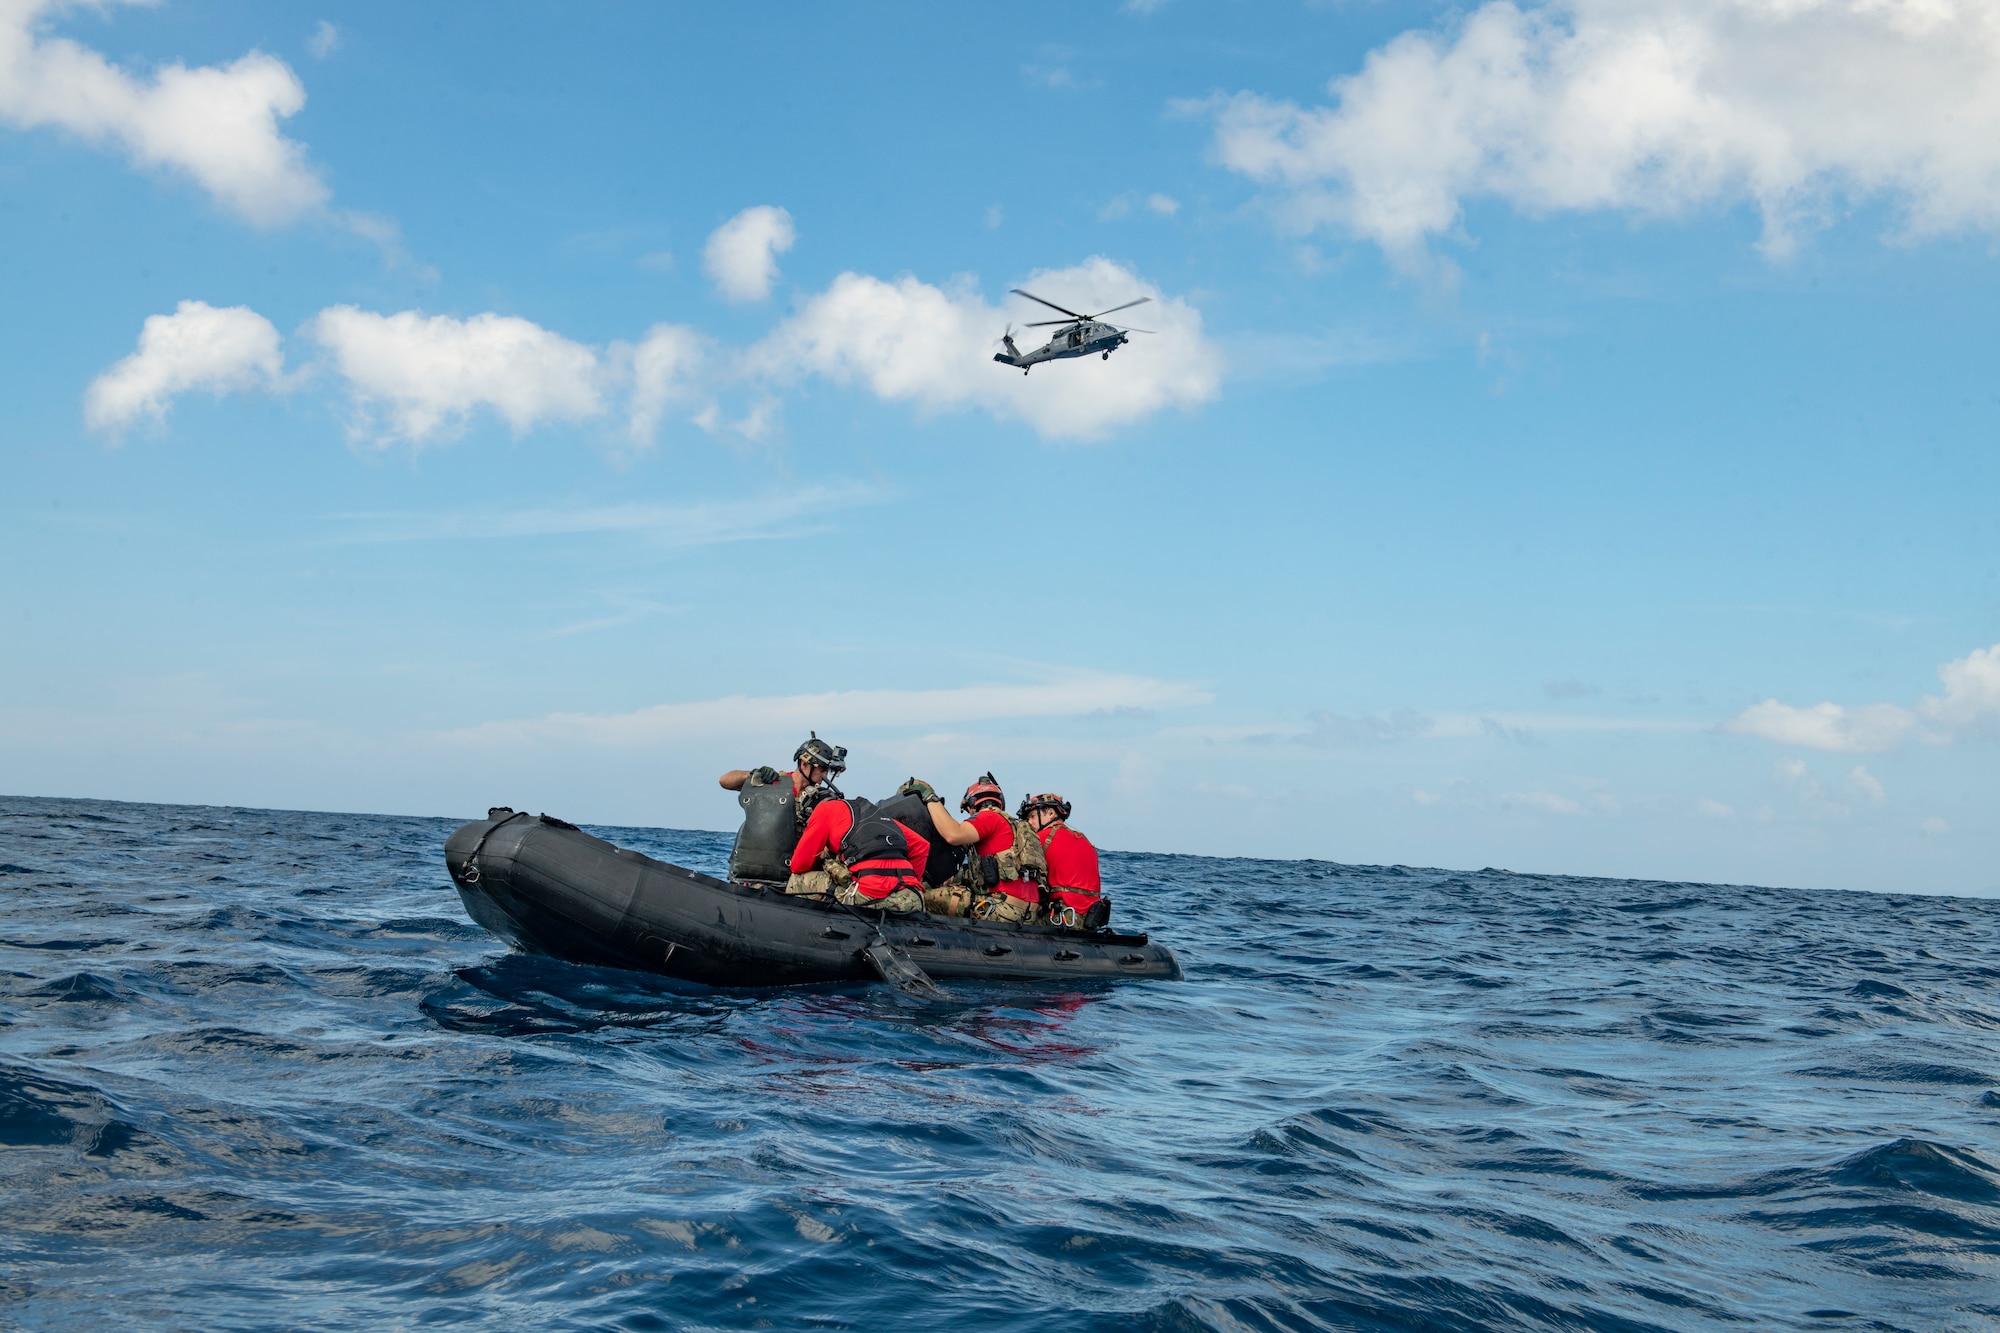 U.S. Air Force pararescuemen assigned to the 31st Rescue Squadron are aboard a combat rubber raiding craft during a search and rescue training exercise in the Pacific Ocean, Sept. 13, 2022. These training exercises are designed to posture RQS’s to respond quickly and effectively to a wide range of possible contingencies. (U.S. Air Force photo by Senior Airman Jessi Roth)